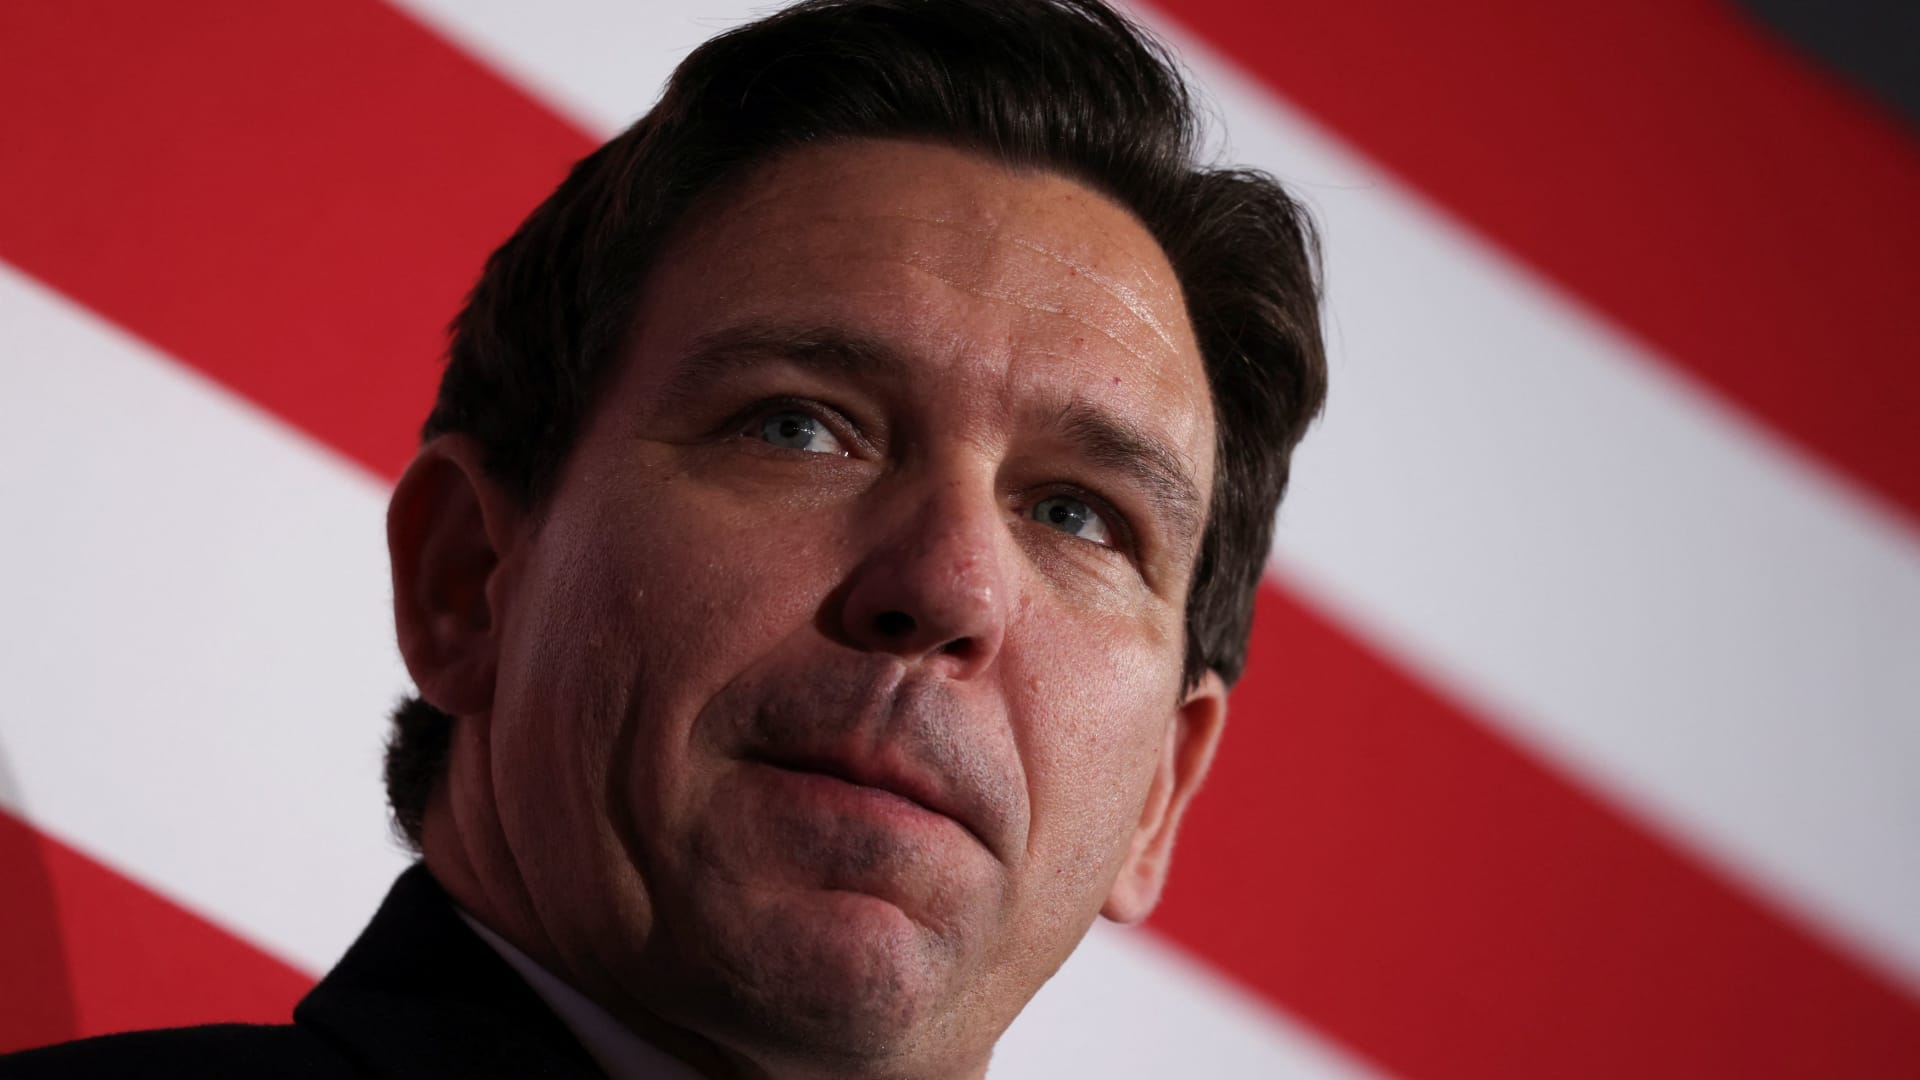 Republican presidential candidate and Florida Governor Ron DeSantis looks on during a campaign event at the Chrome Horse Saloon ahead of the caucus vote in Cedar Rapids, Iowa, U.S., January 14, 2024. 